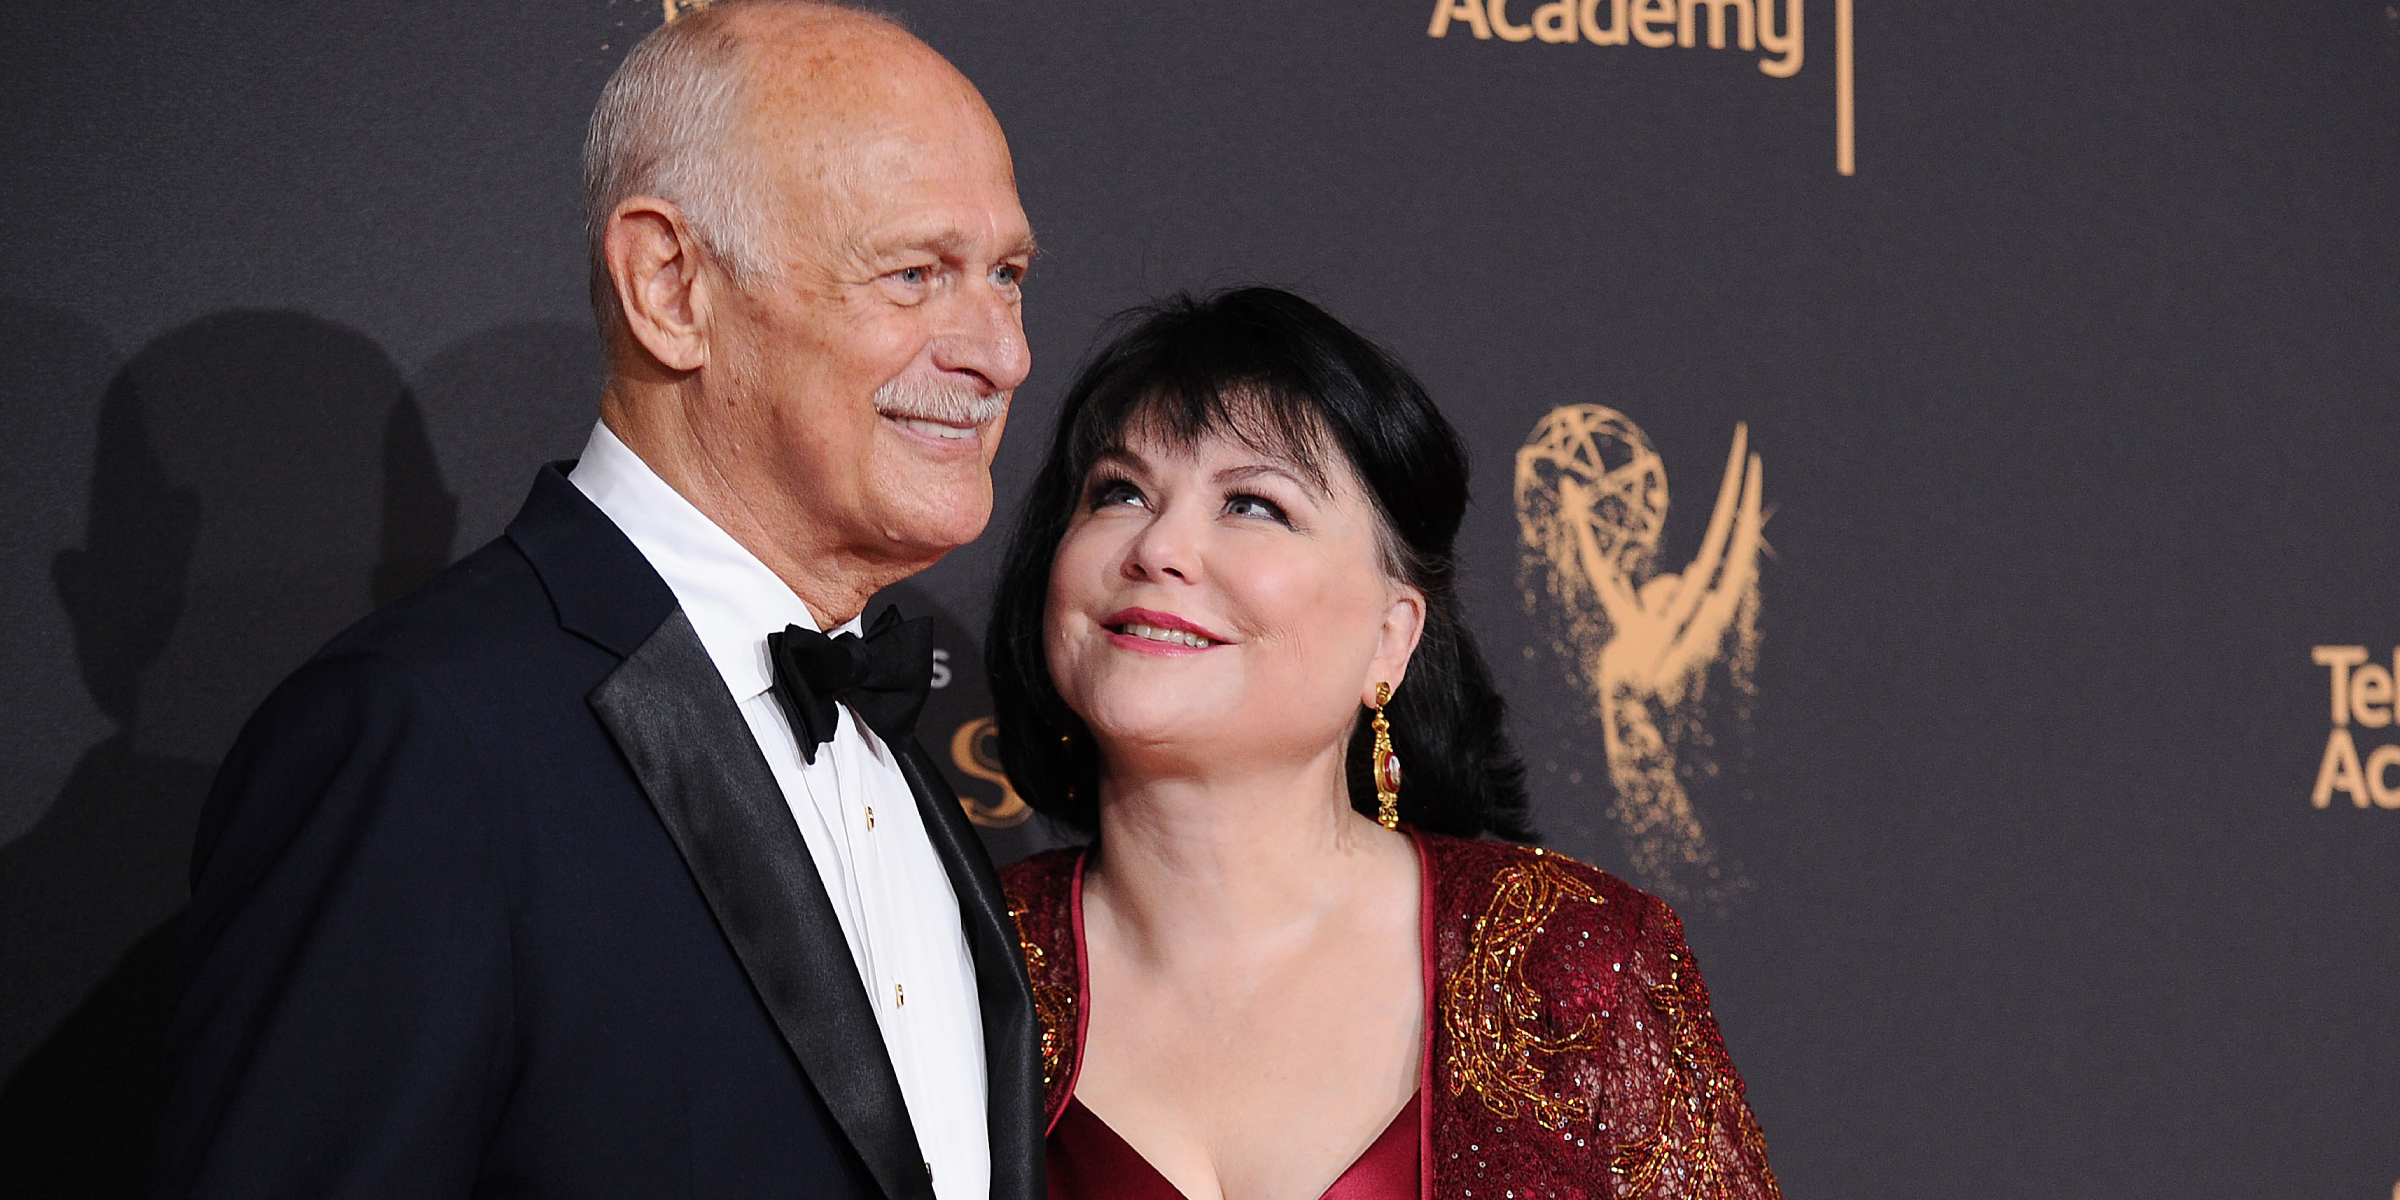 Delta Burke and her husband Gerald McRaney | Source: Getty Images